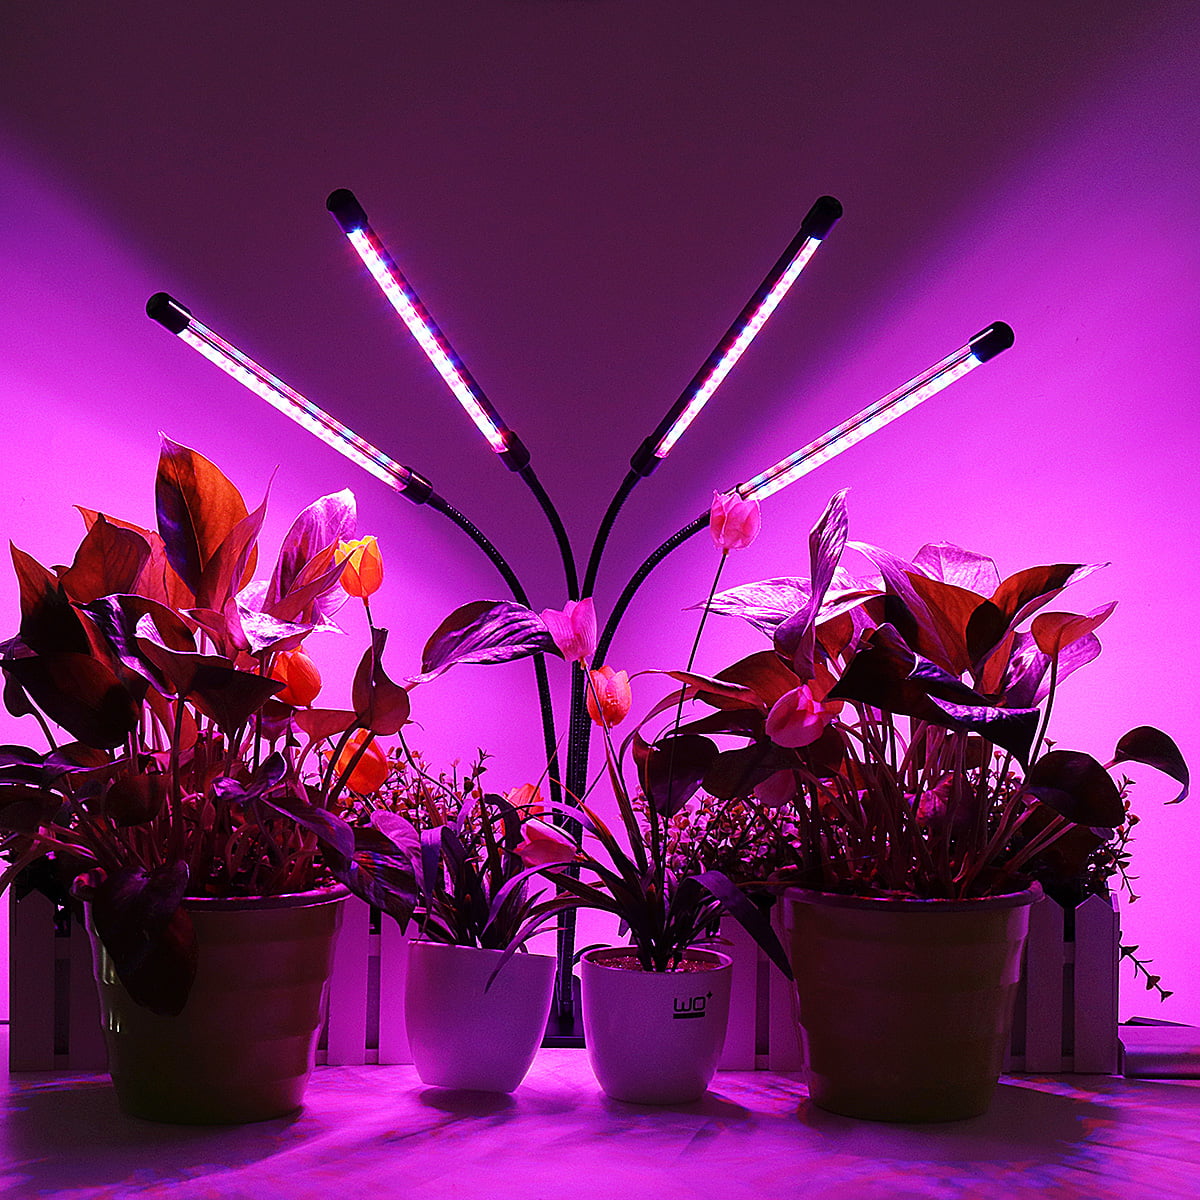 Details about   Grow Light Plant Growing LED Lamp Indoor Plants Hydroponics Timing Dimming US 